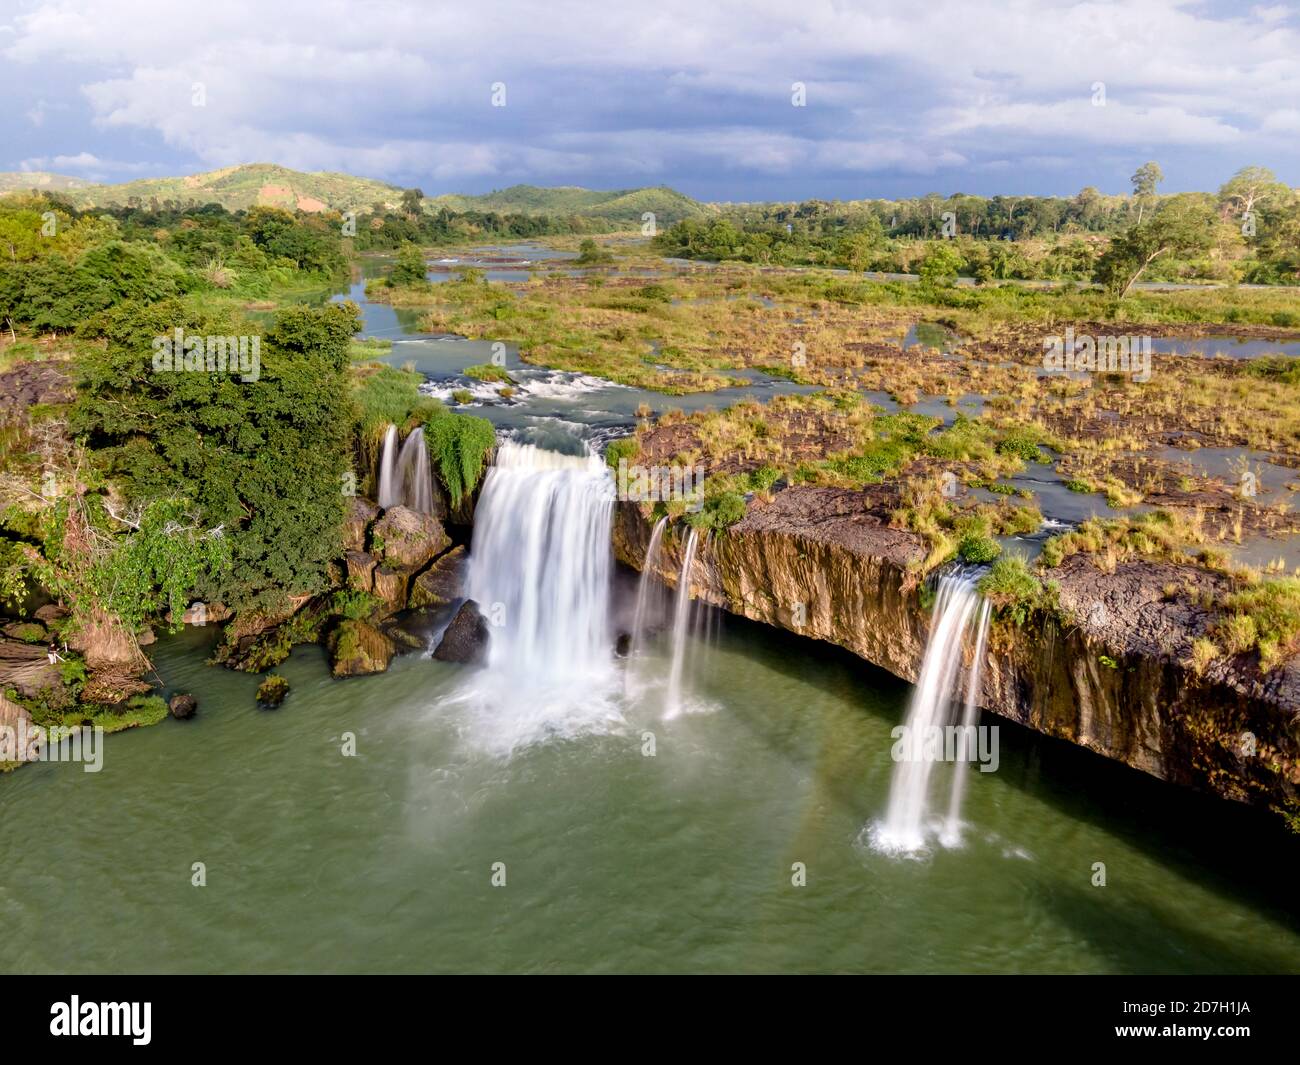 Panoramic view of the beautiful Dray Nur waterfall in Dak Lak province, Vietnam from above Stock Photo